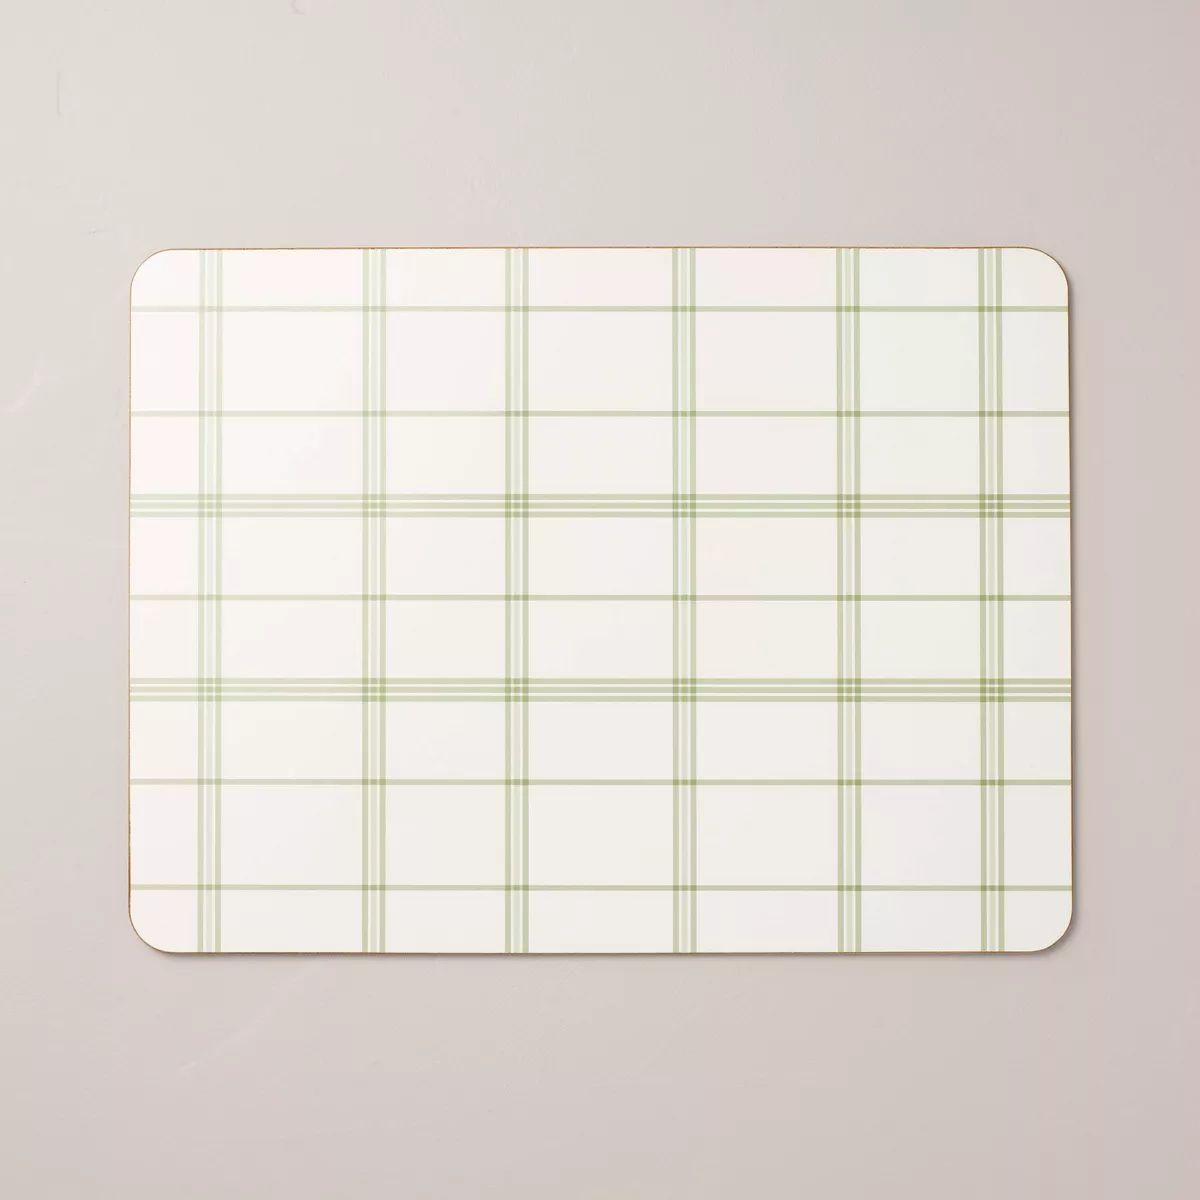 Tri-Stripe Plaid Wipeable Corkboard Placemat Light Green/Cream - Hearth & Hand™ with Magnolia | Target